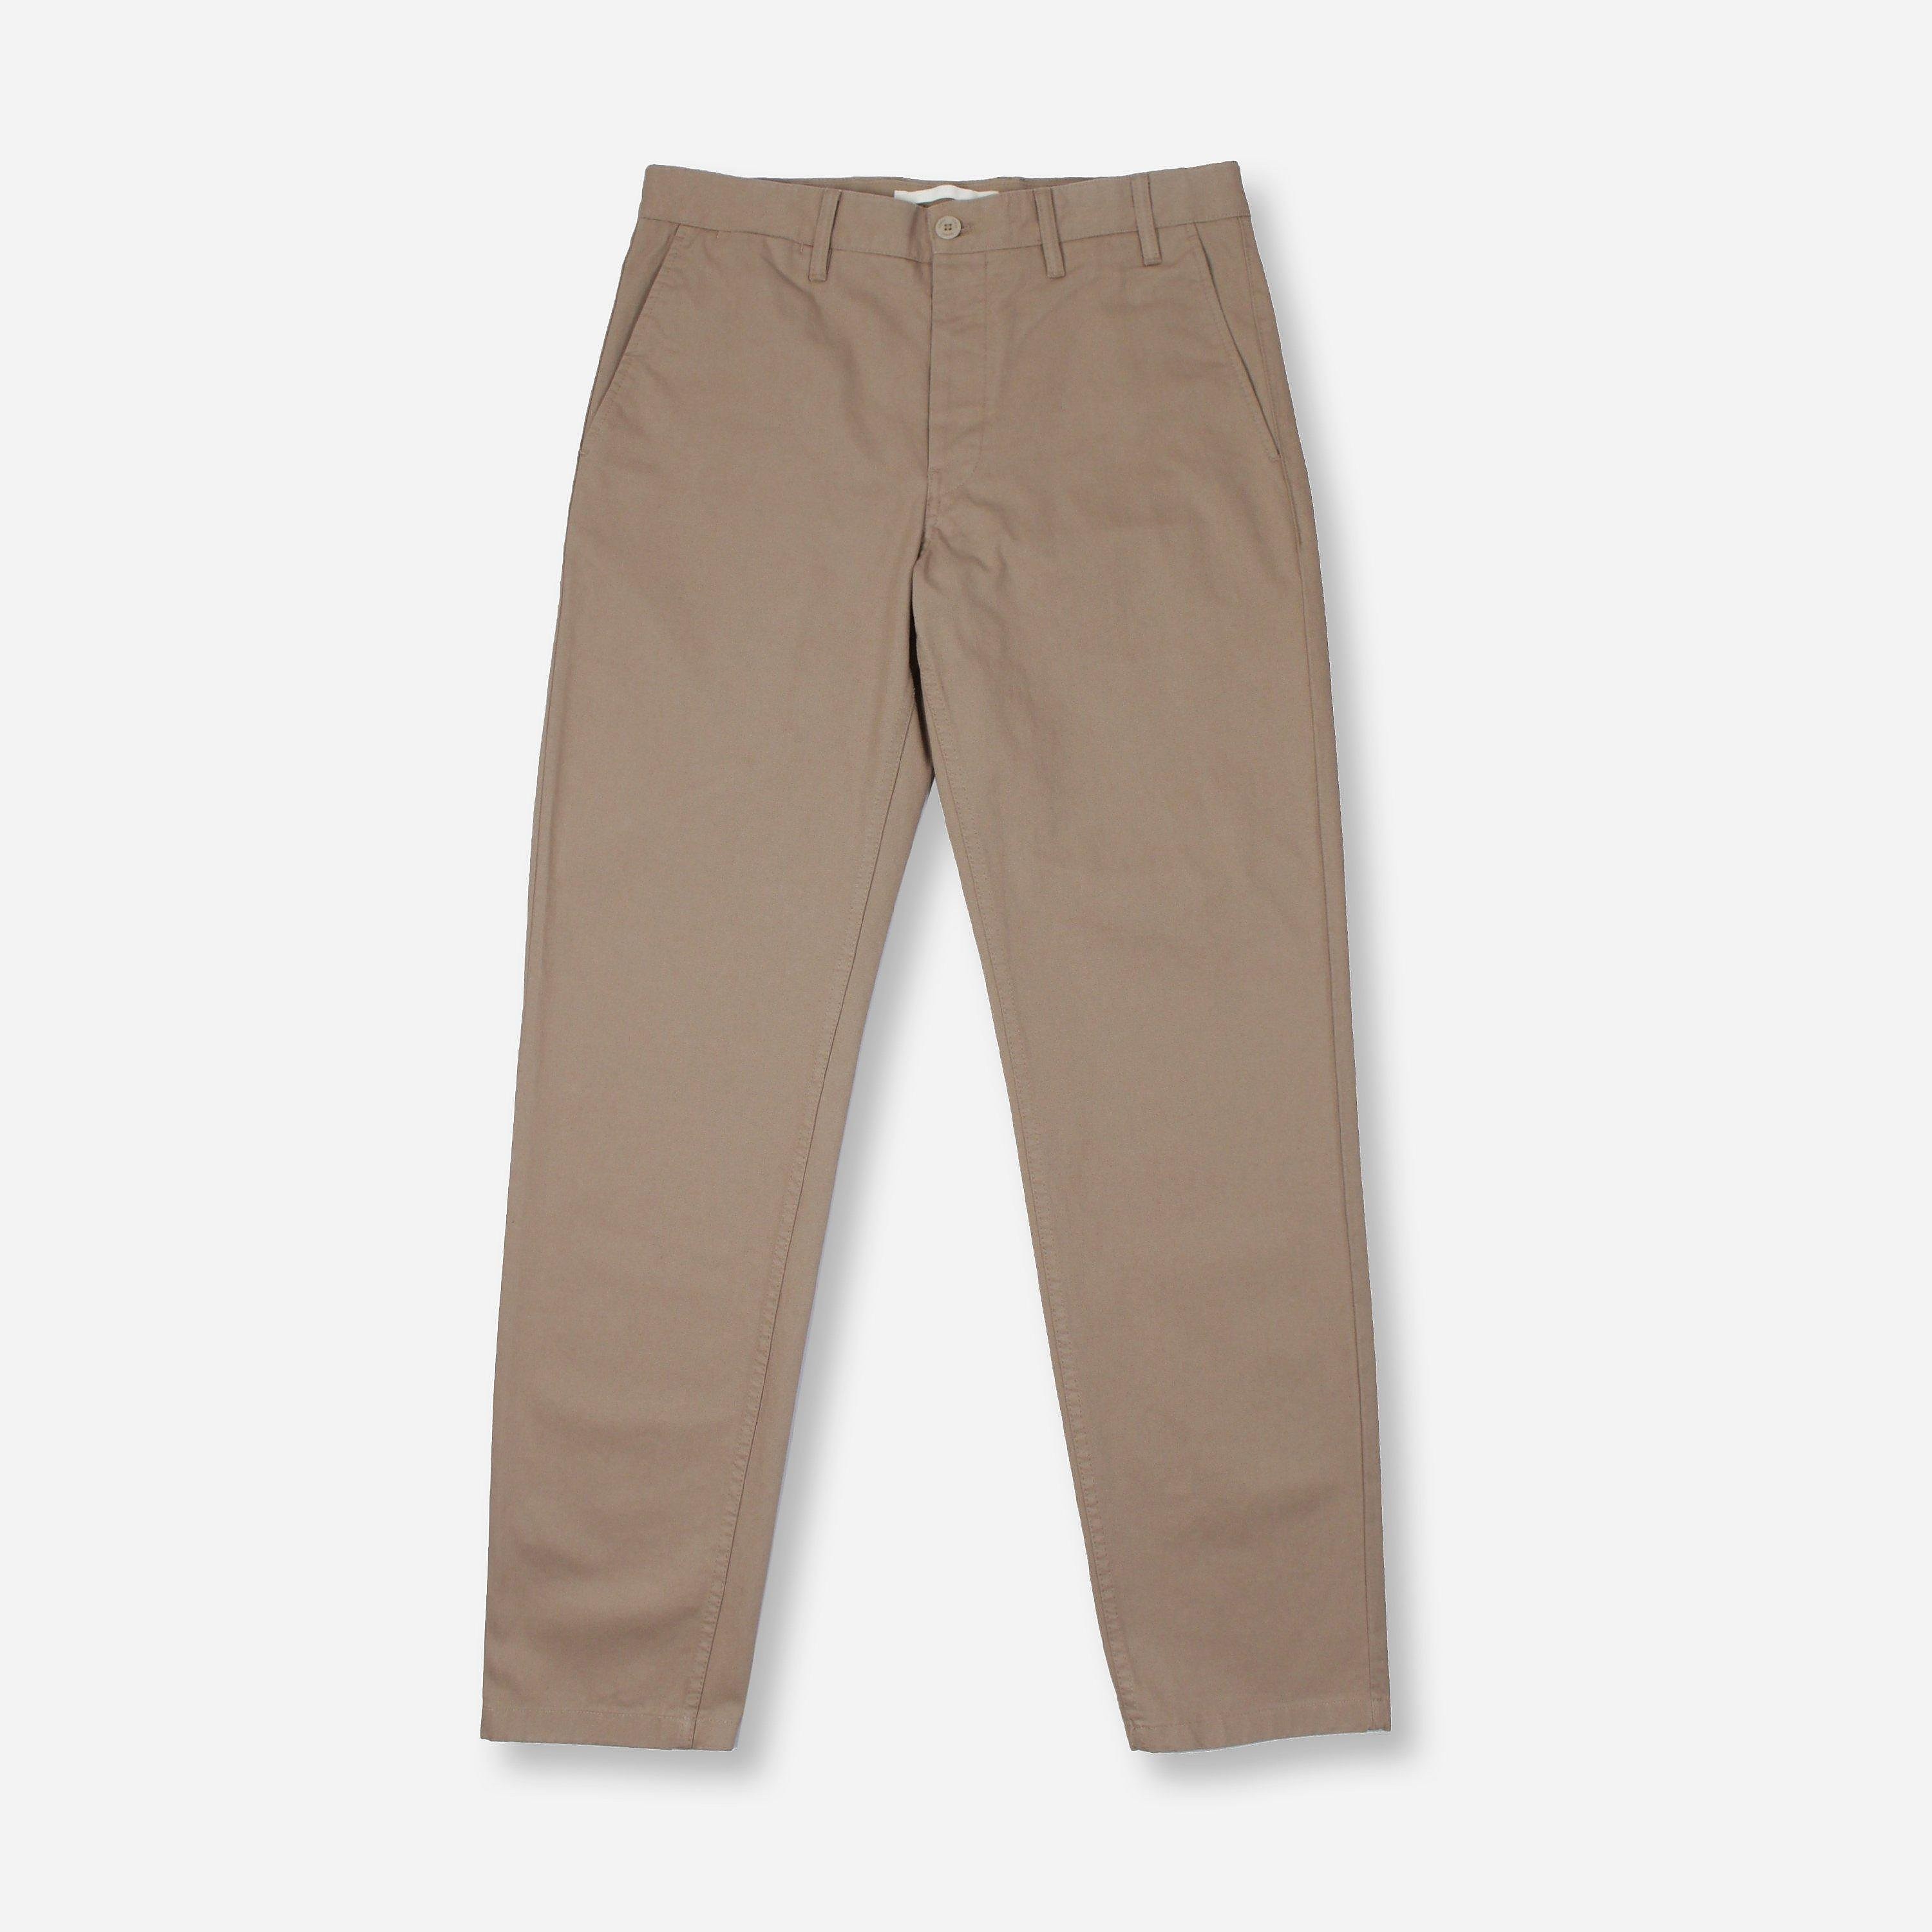 Mens Designer Chinos And Trousers Fitted Suit Trousers And Skinny Chinos 